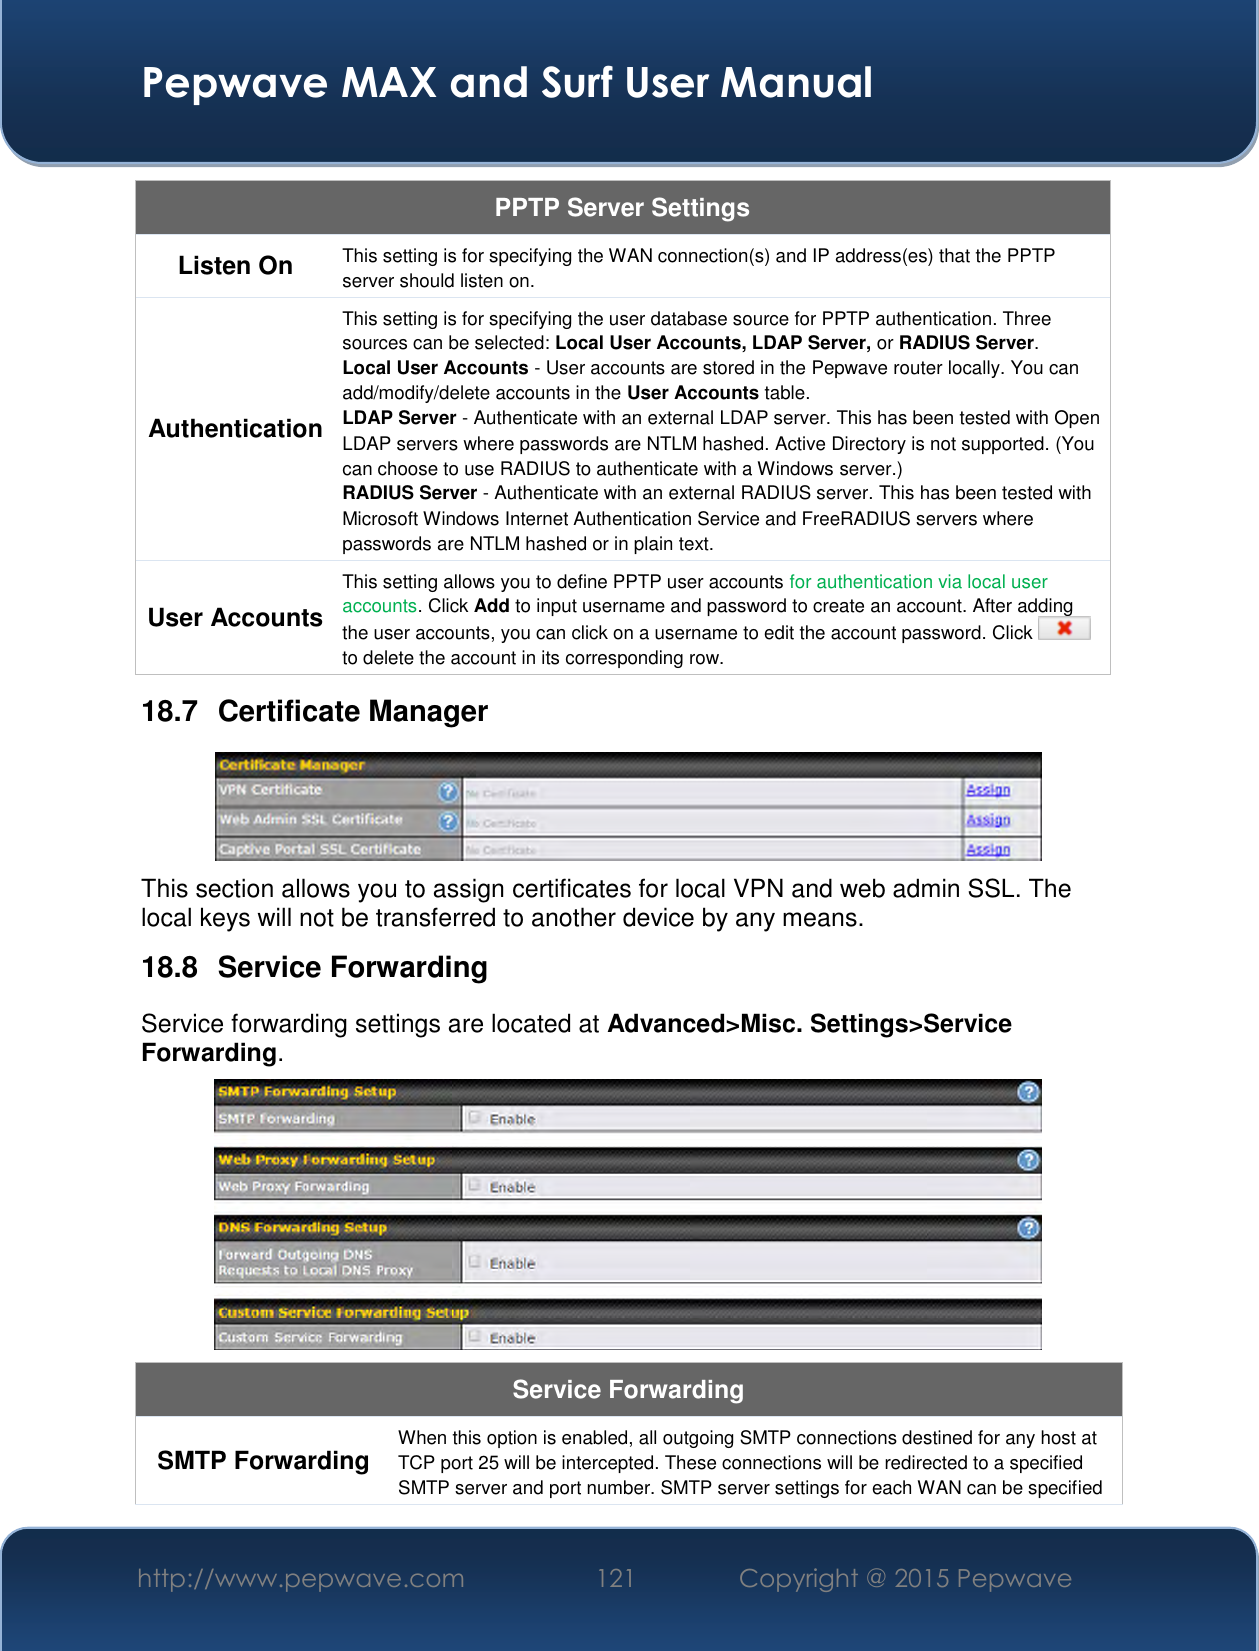  Pepwave MAX and Surf User Manual http://www.pepwave.com 121   Copyright @ 2015 Pepwave   PPTP Server Settings Listen On This setting is for specifying the WAN connection(s) and IP address(es) that the PPTP server should listen on. Authentication This setting is for specifying the user database source for PPTP authentication. Three sources can be selected: Local User Accounts, LDAP Server, or RADIUS Server. Local User Accounts - User accounts are stored in the Pepwave router locally. You can add/modify/delete accounts in the User Accounts table. LDAP Server - Authenticate with an external LDAP server. This has been tested with Open LDAP servers where passwords are NTLM hashed. Active Directory is not supported. (You can choose to use RADIUS to authenticate with a Windows server.) RADIUS Server - Authenticate with an external RADIUS server. This has been tested with Microsoft Windows Internet Authentication Service and FreeRADIUS servers where passwords are NTLM hashed or in plain text. User Accounts This setting allows you to define PPTP user accounts for authentication via local user accounts. Click Add to input username and password to create an account. After adding the user accounts, you can click on a username to edit the account password. Click   to delete the account in its corresponding row. 18.7  Certificate Manager  This section allows you to assign certificates for local VPN and web admin SSL. The local keys will not be transferred to another device by any means. 18.8  Service Forwarding Service forwarding settings are located at Advanced&gt;Misc. Settings&gt;Service Forwarding.  Service Forwarding SMTP Forwarding When this option is enabled, all outgoing SMTP connections destined for any host at TCP port 25 will be intercepted. These connections will be redirected to a specified SMTP server and port number. SMTP server settings for each WAN can be specified 